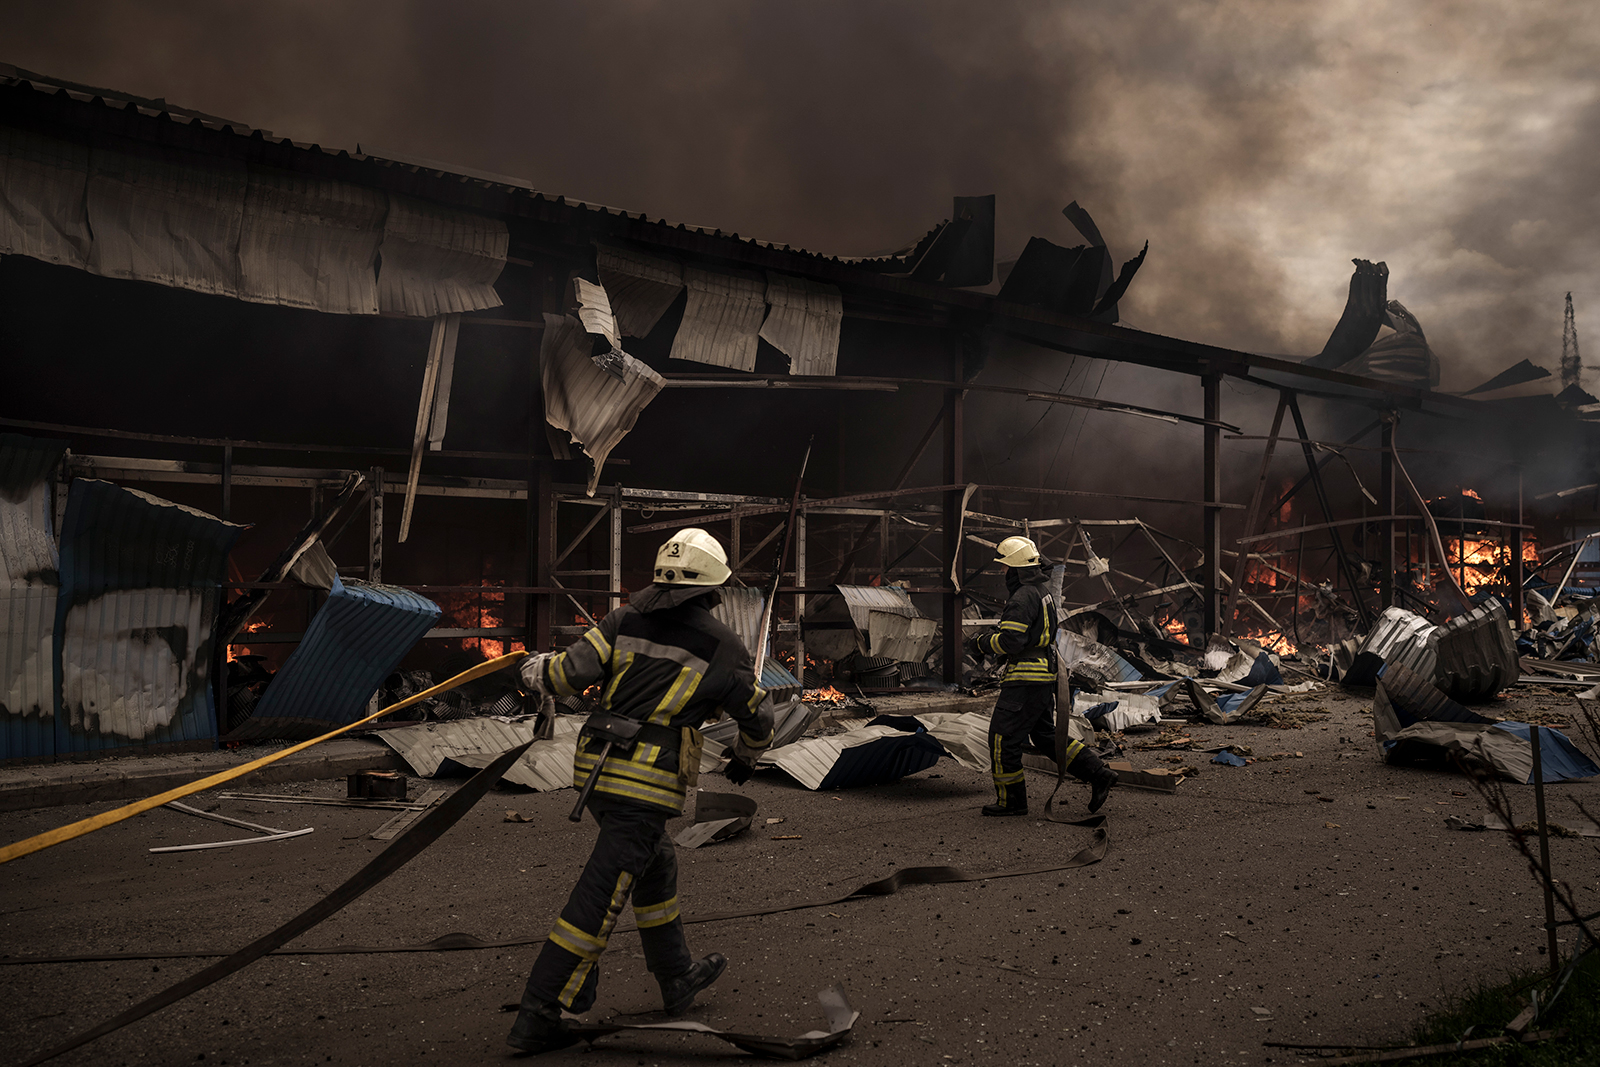 Firefighters work to extinguish a fire at a warehouse amid Russian air raids in Kharkiv, Ukraine, on Saturday, April 23.